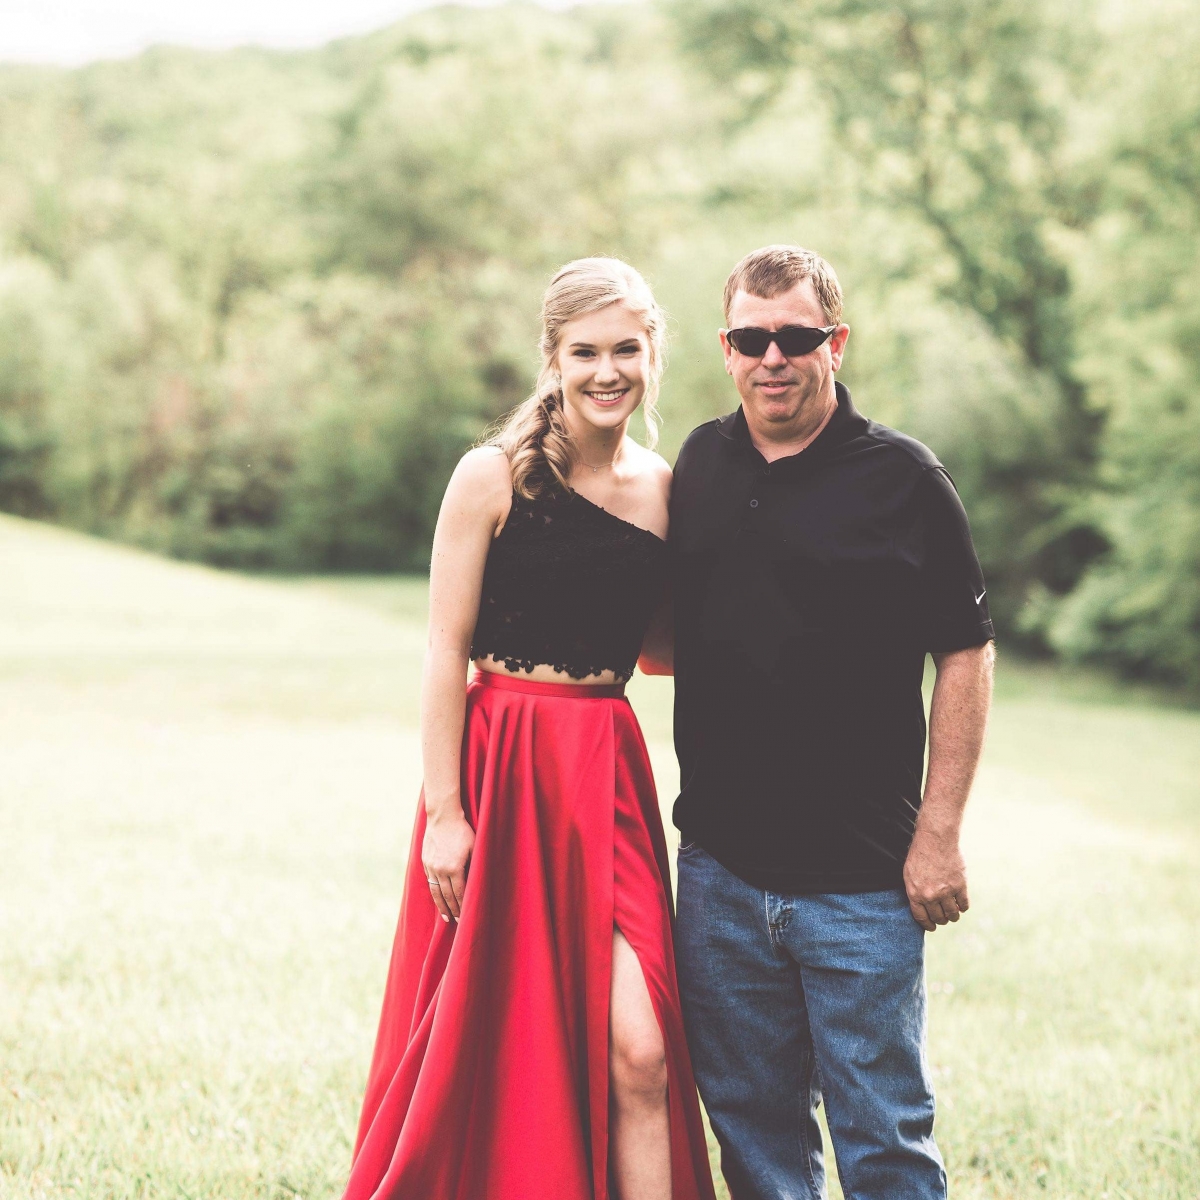 A young woman smiles in a beautiful dress while posing for a picture with her father